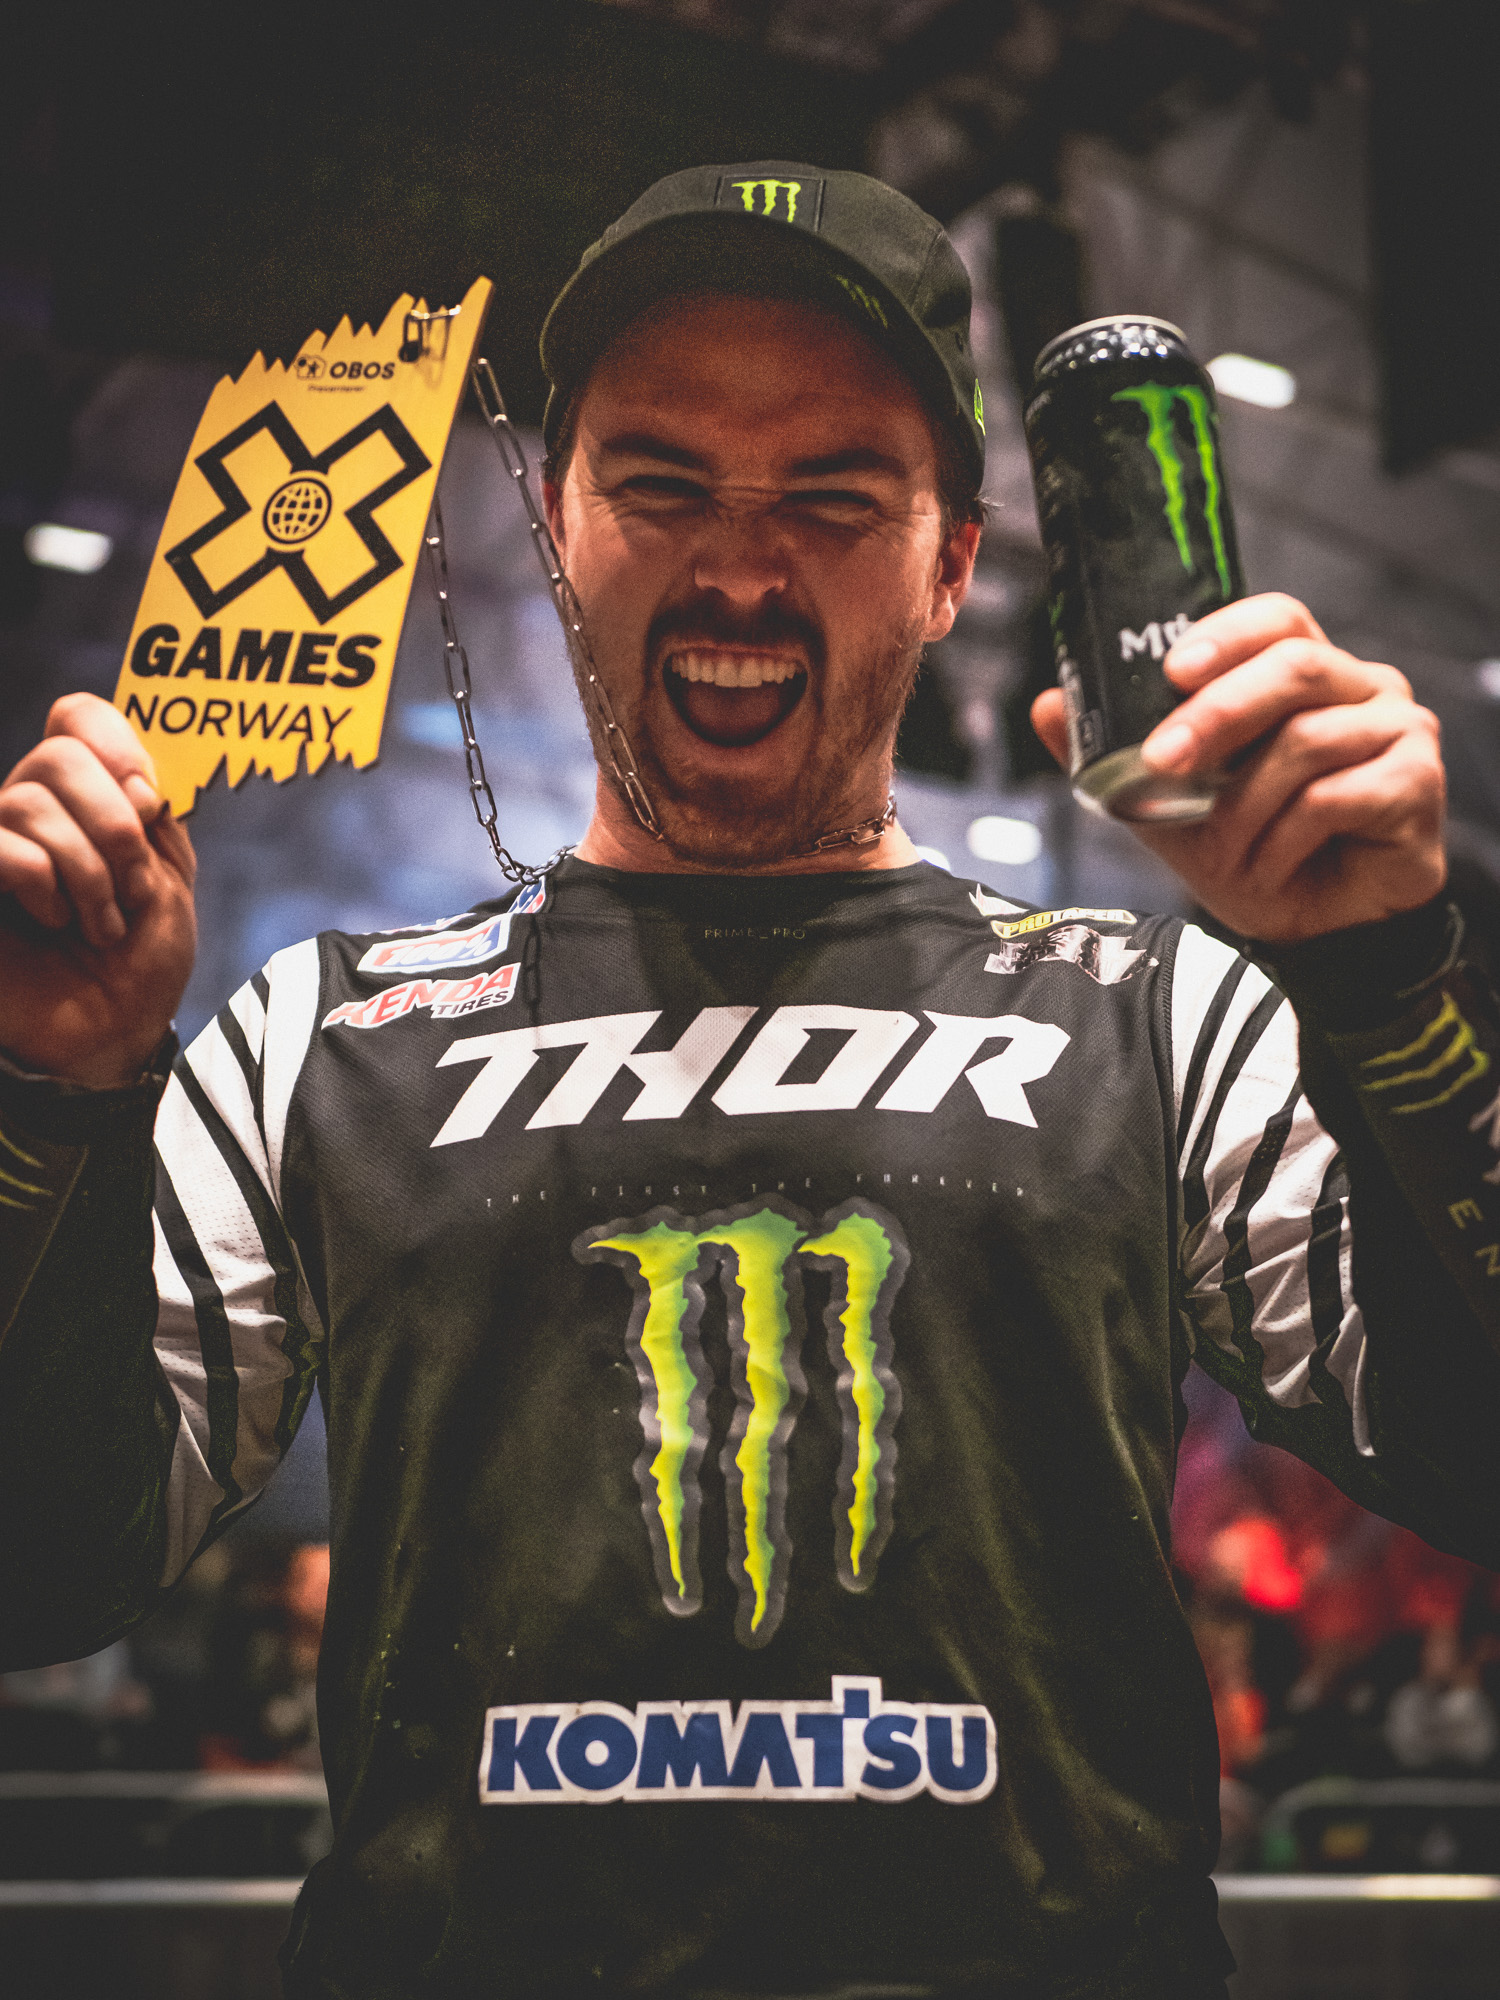 Monster Energy's Jackson Strong Takes Gold in Moto X Best Trick at X Games Norway 2019